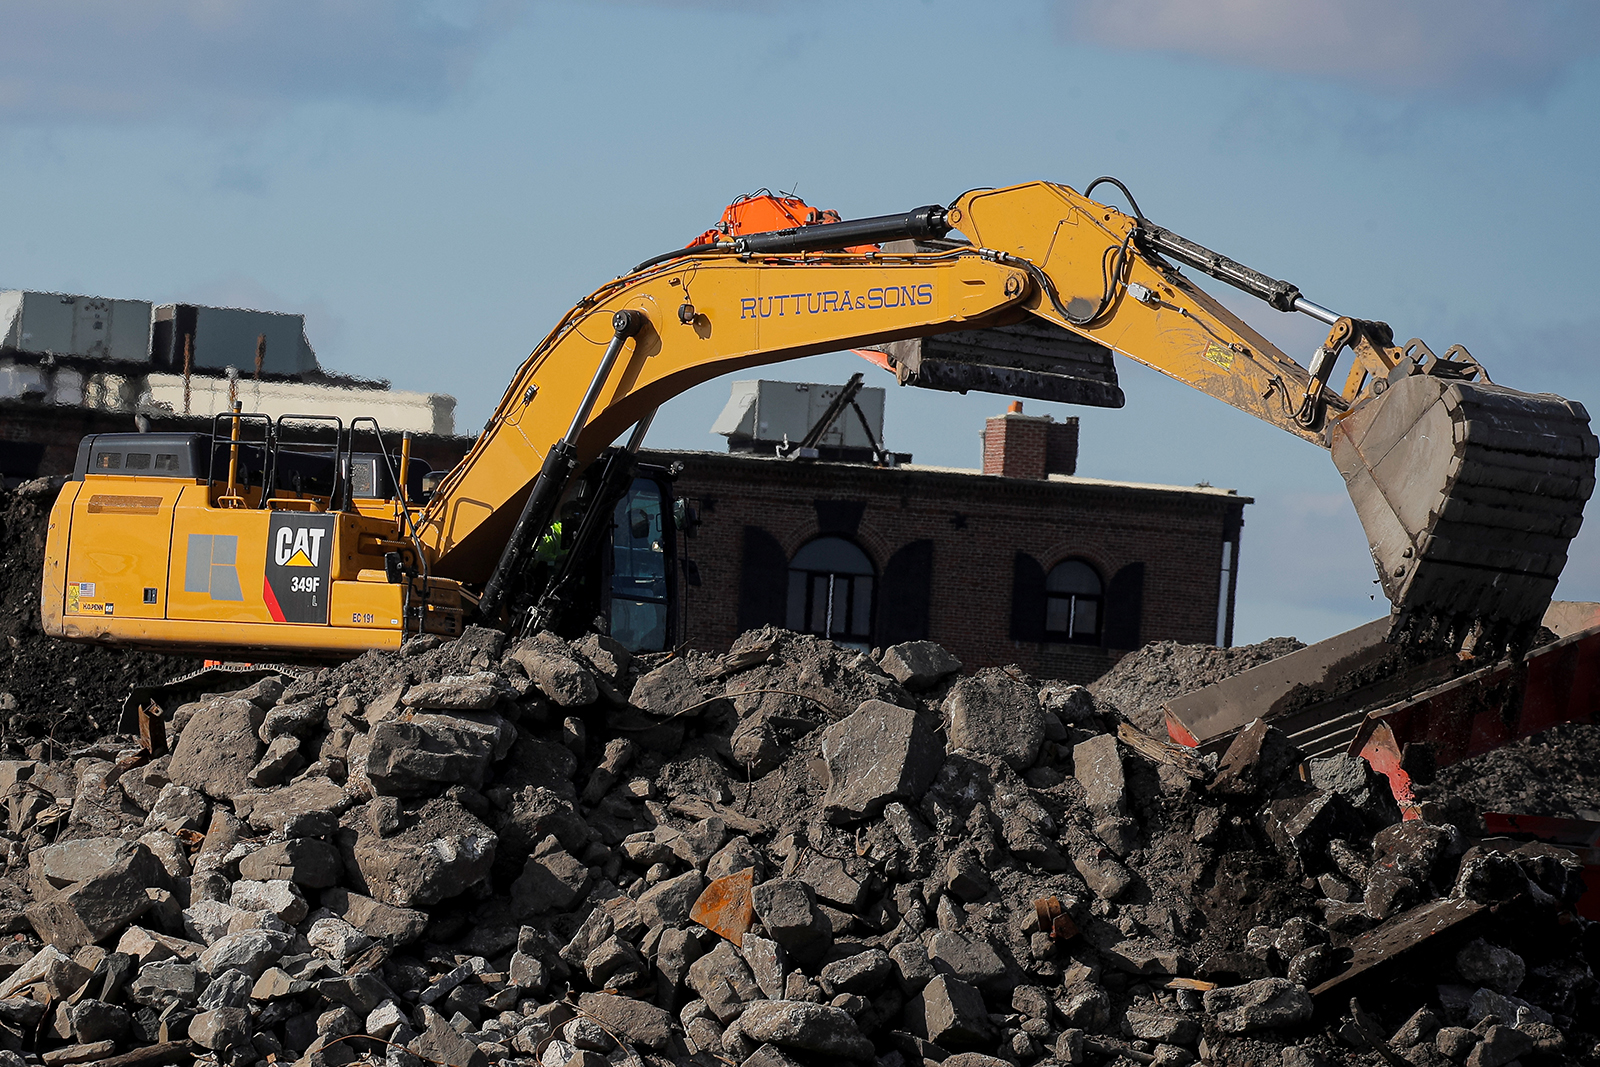 A Caterpillar excavator is seen working at a construction site near the New York Harbor in Brooklyn, in March 2021. 